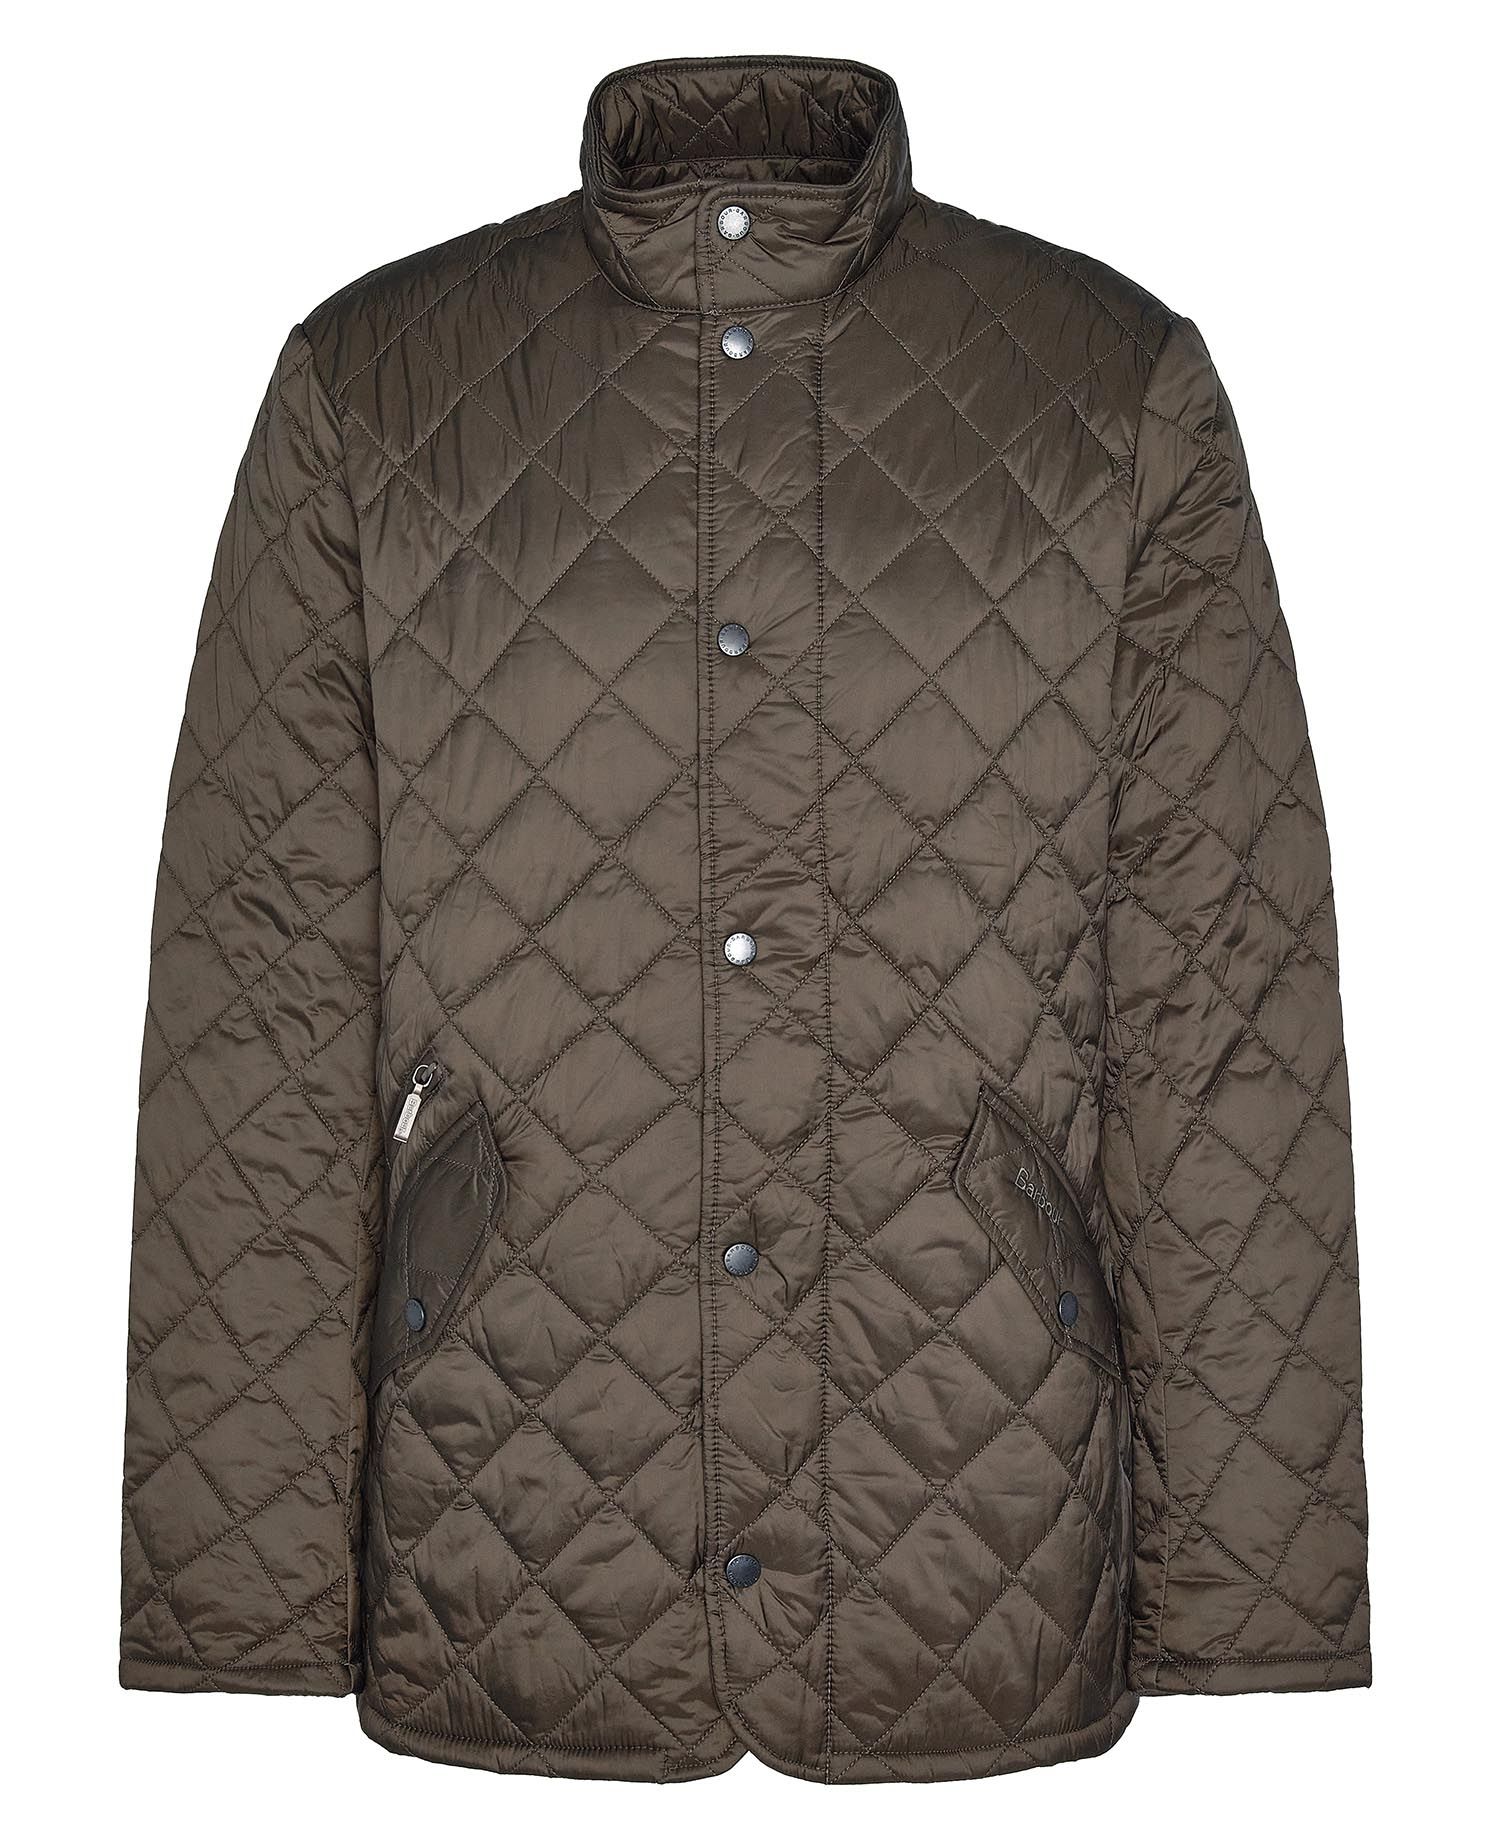 Barbour Flyweight Chelsea Quilt in Olive | Barbour